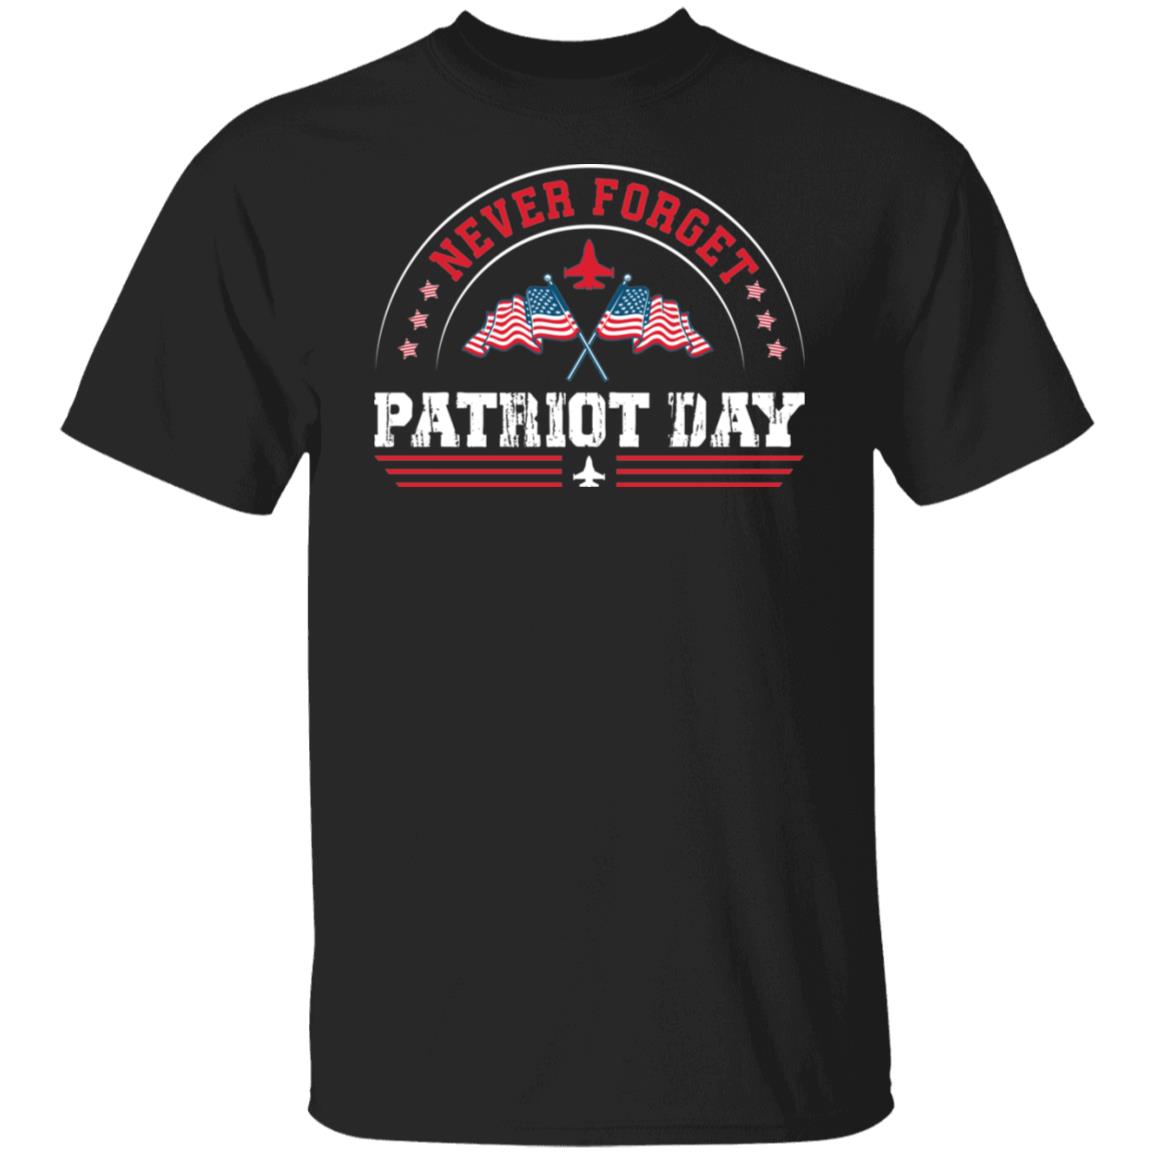 Never Forget Patriot Day American Flag Shirt